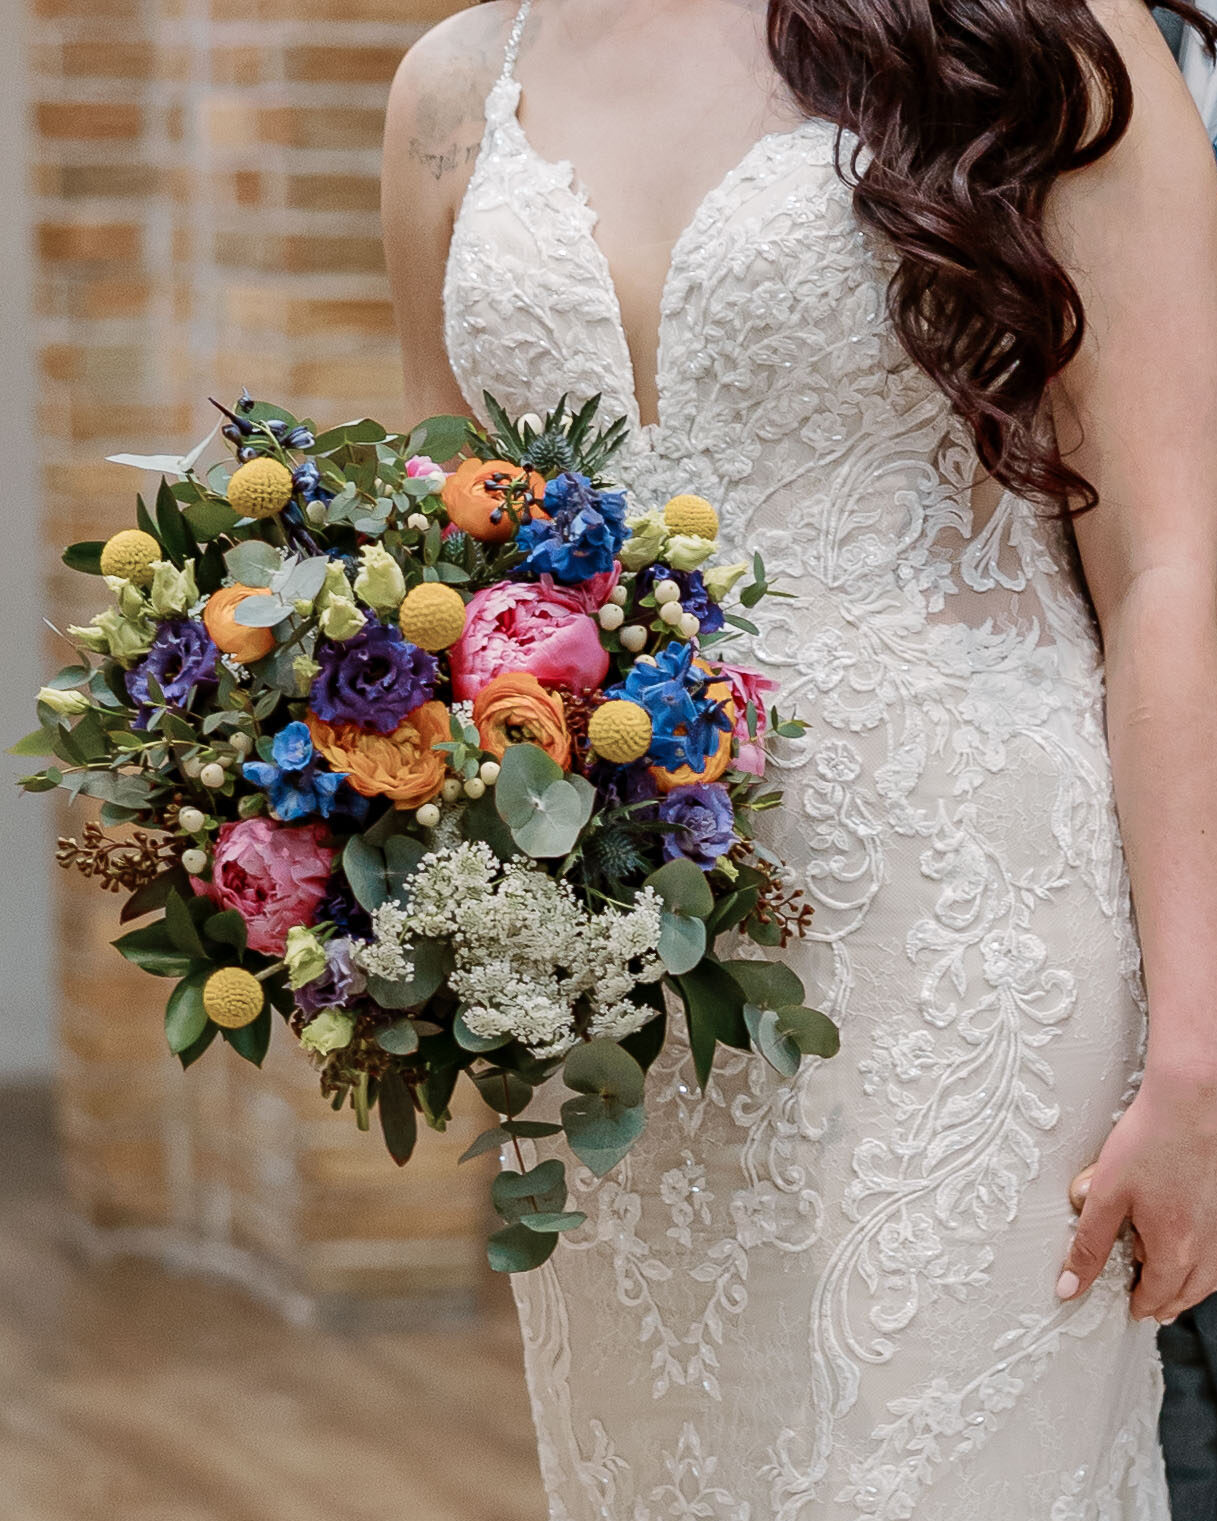 Bold Blooms, Colorful Wedding Flowers, Colorful Bouquets, Colorful Bridal Bouquet, Colorful Wedding Flowers